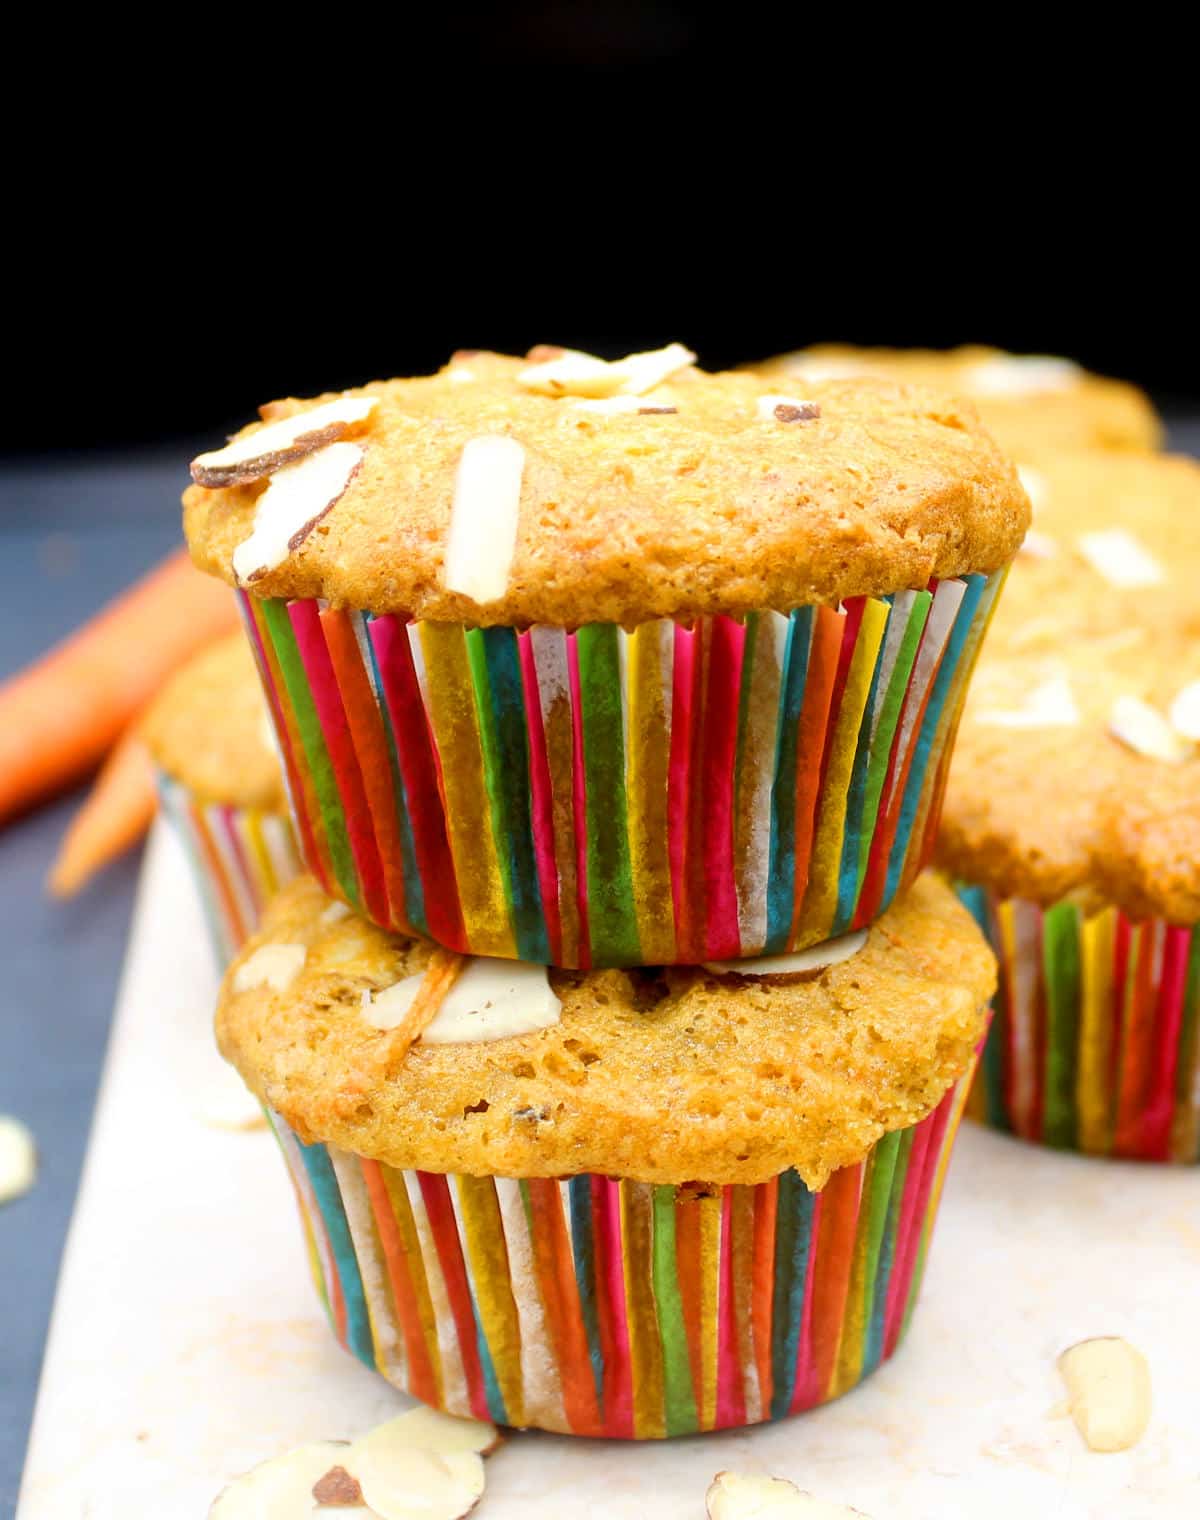 Two carrot muffins with colorful liners and studded with almonds stacked on top of each other with more muffins and carrots in background.